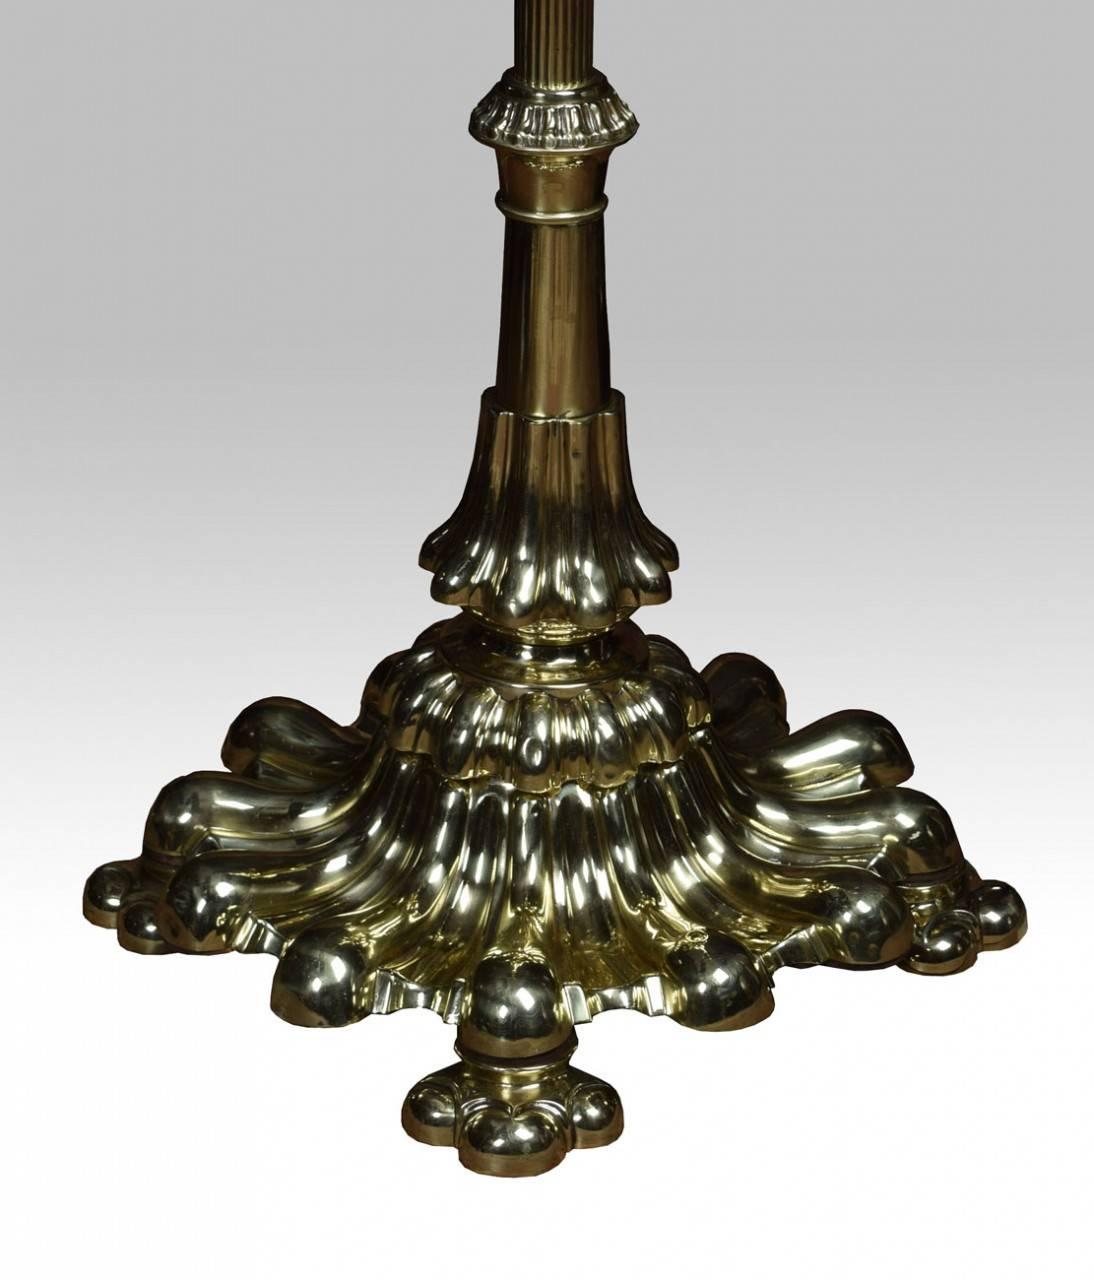 Victorian brass standard lamp, with reeded column and adjustable top column, on shaped splayed base with circular feet (has been re-wired).

Height 55 Inches (adjustable).
 